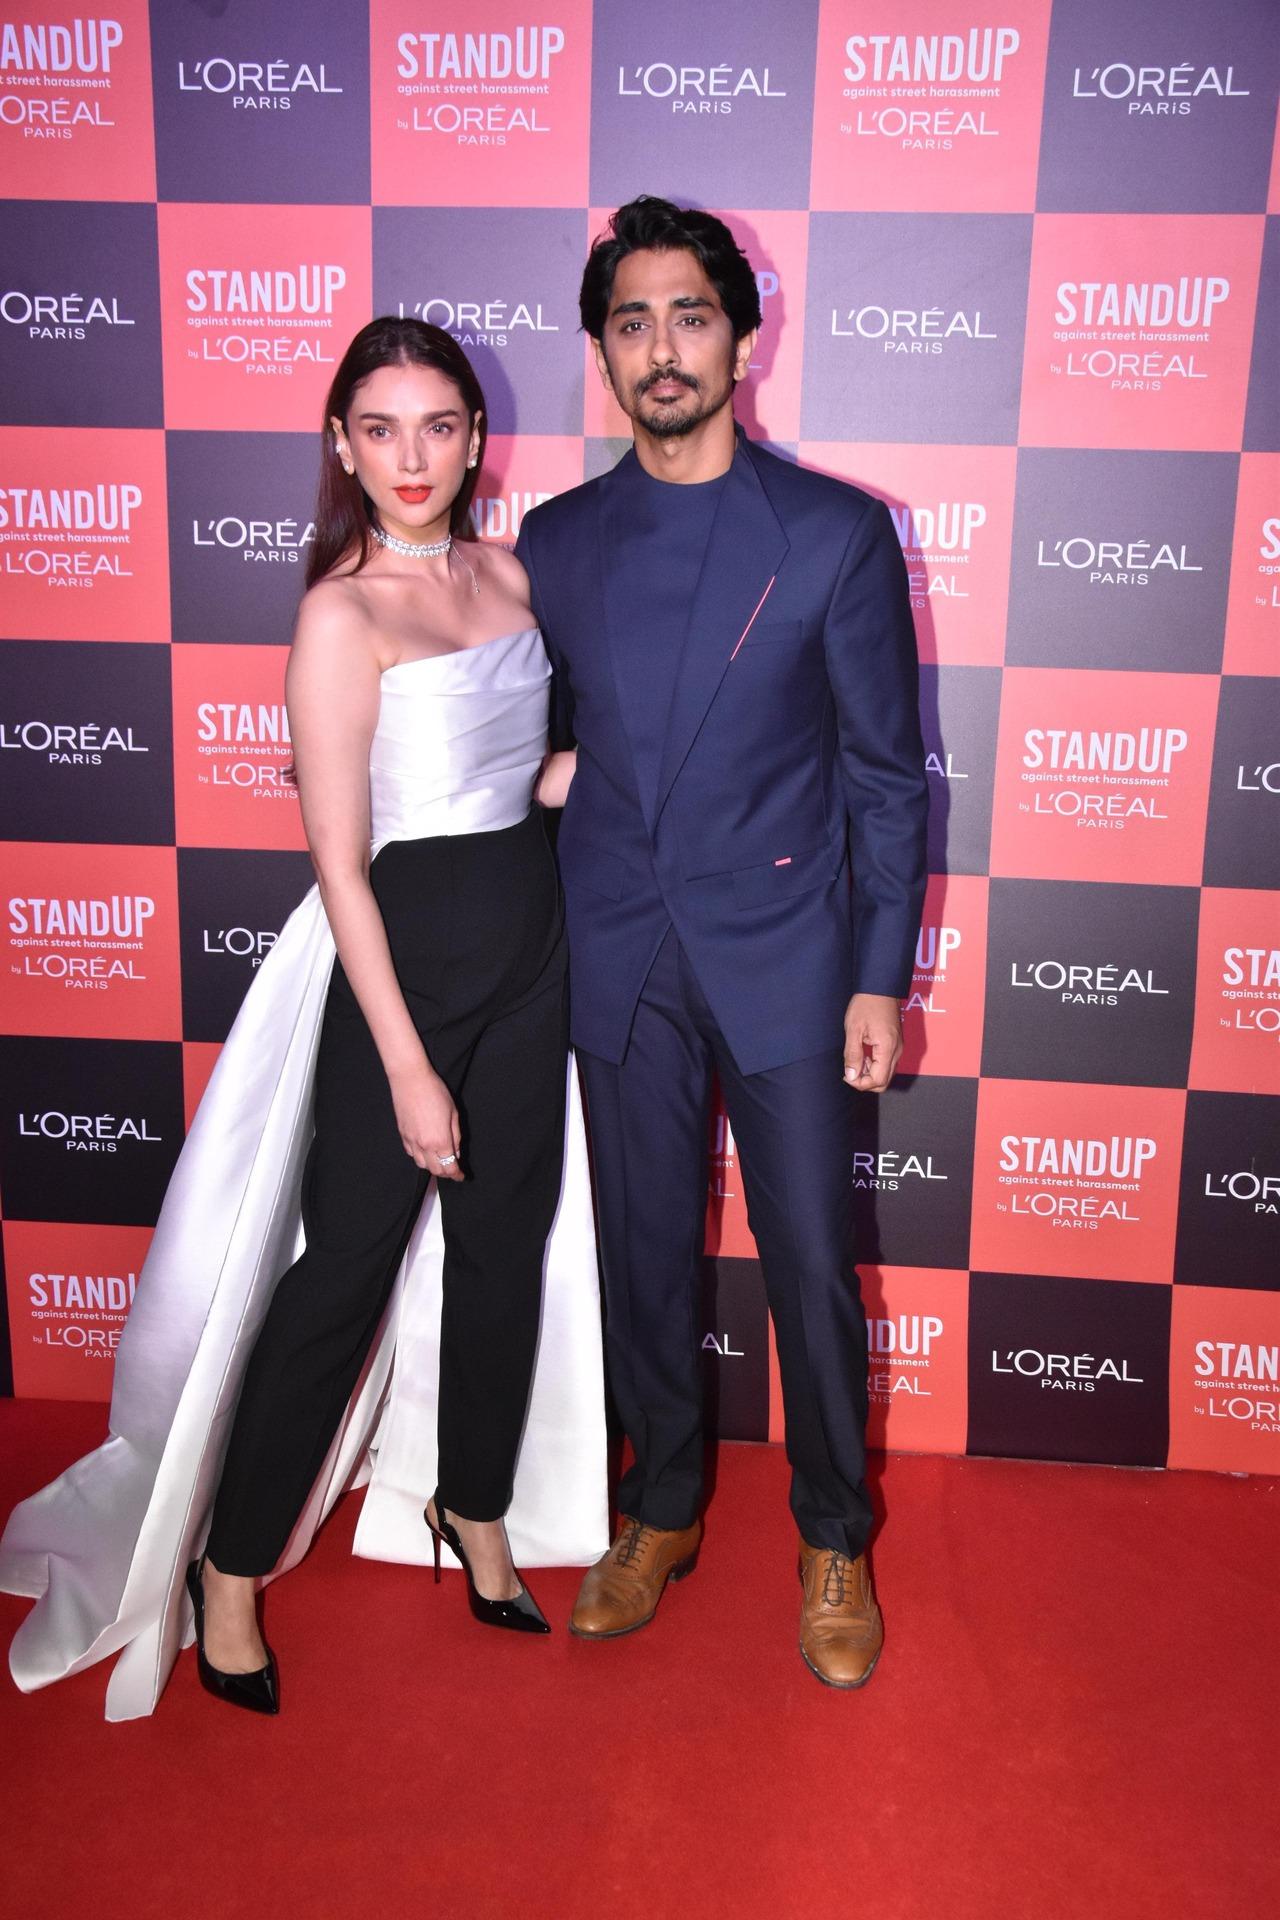 Aditi Rao Hydari and Siddharth made for a stylish couple as they posed together for the paparazzi